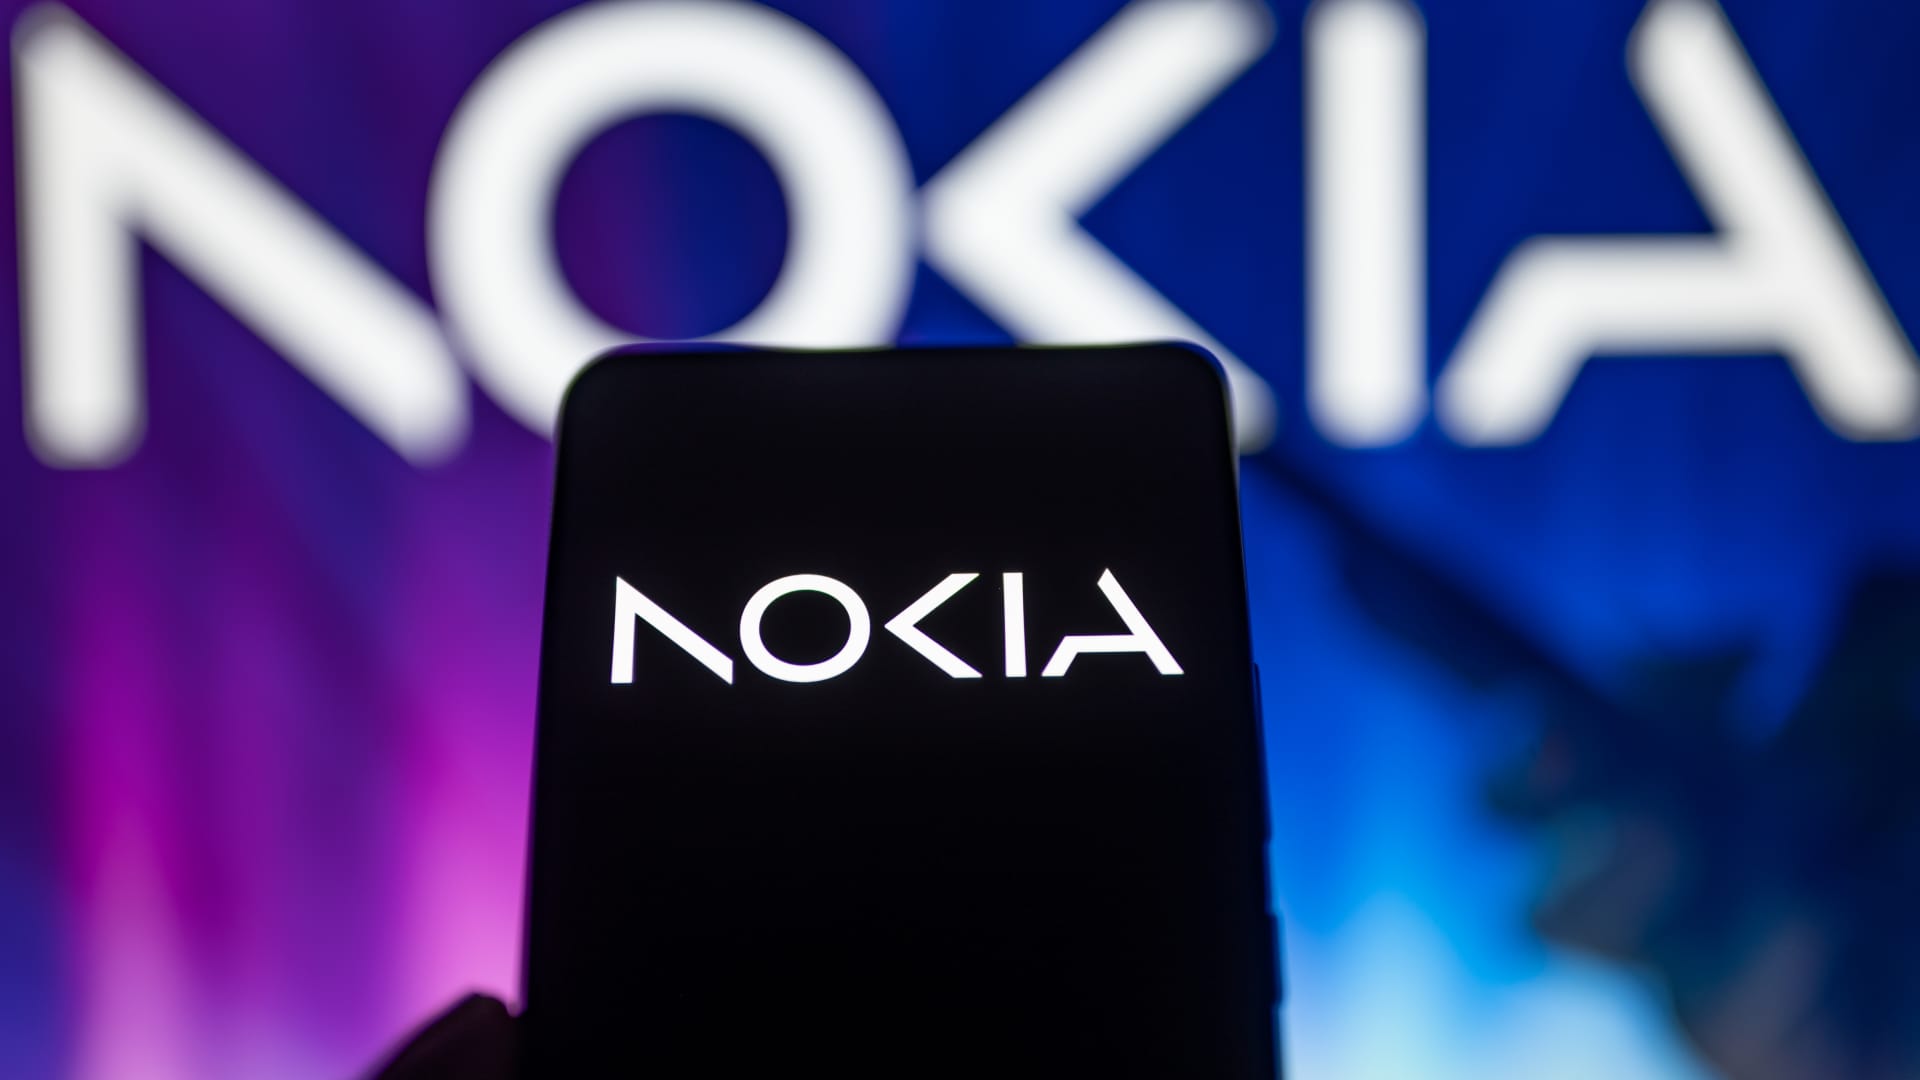 Nokia to cut up to 14,000 jobs after profit plunges 